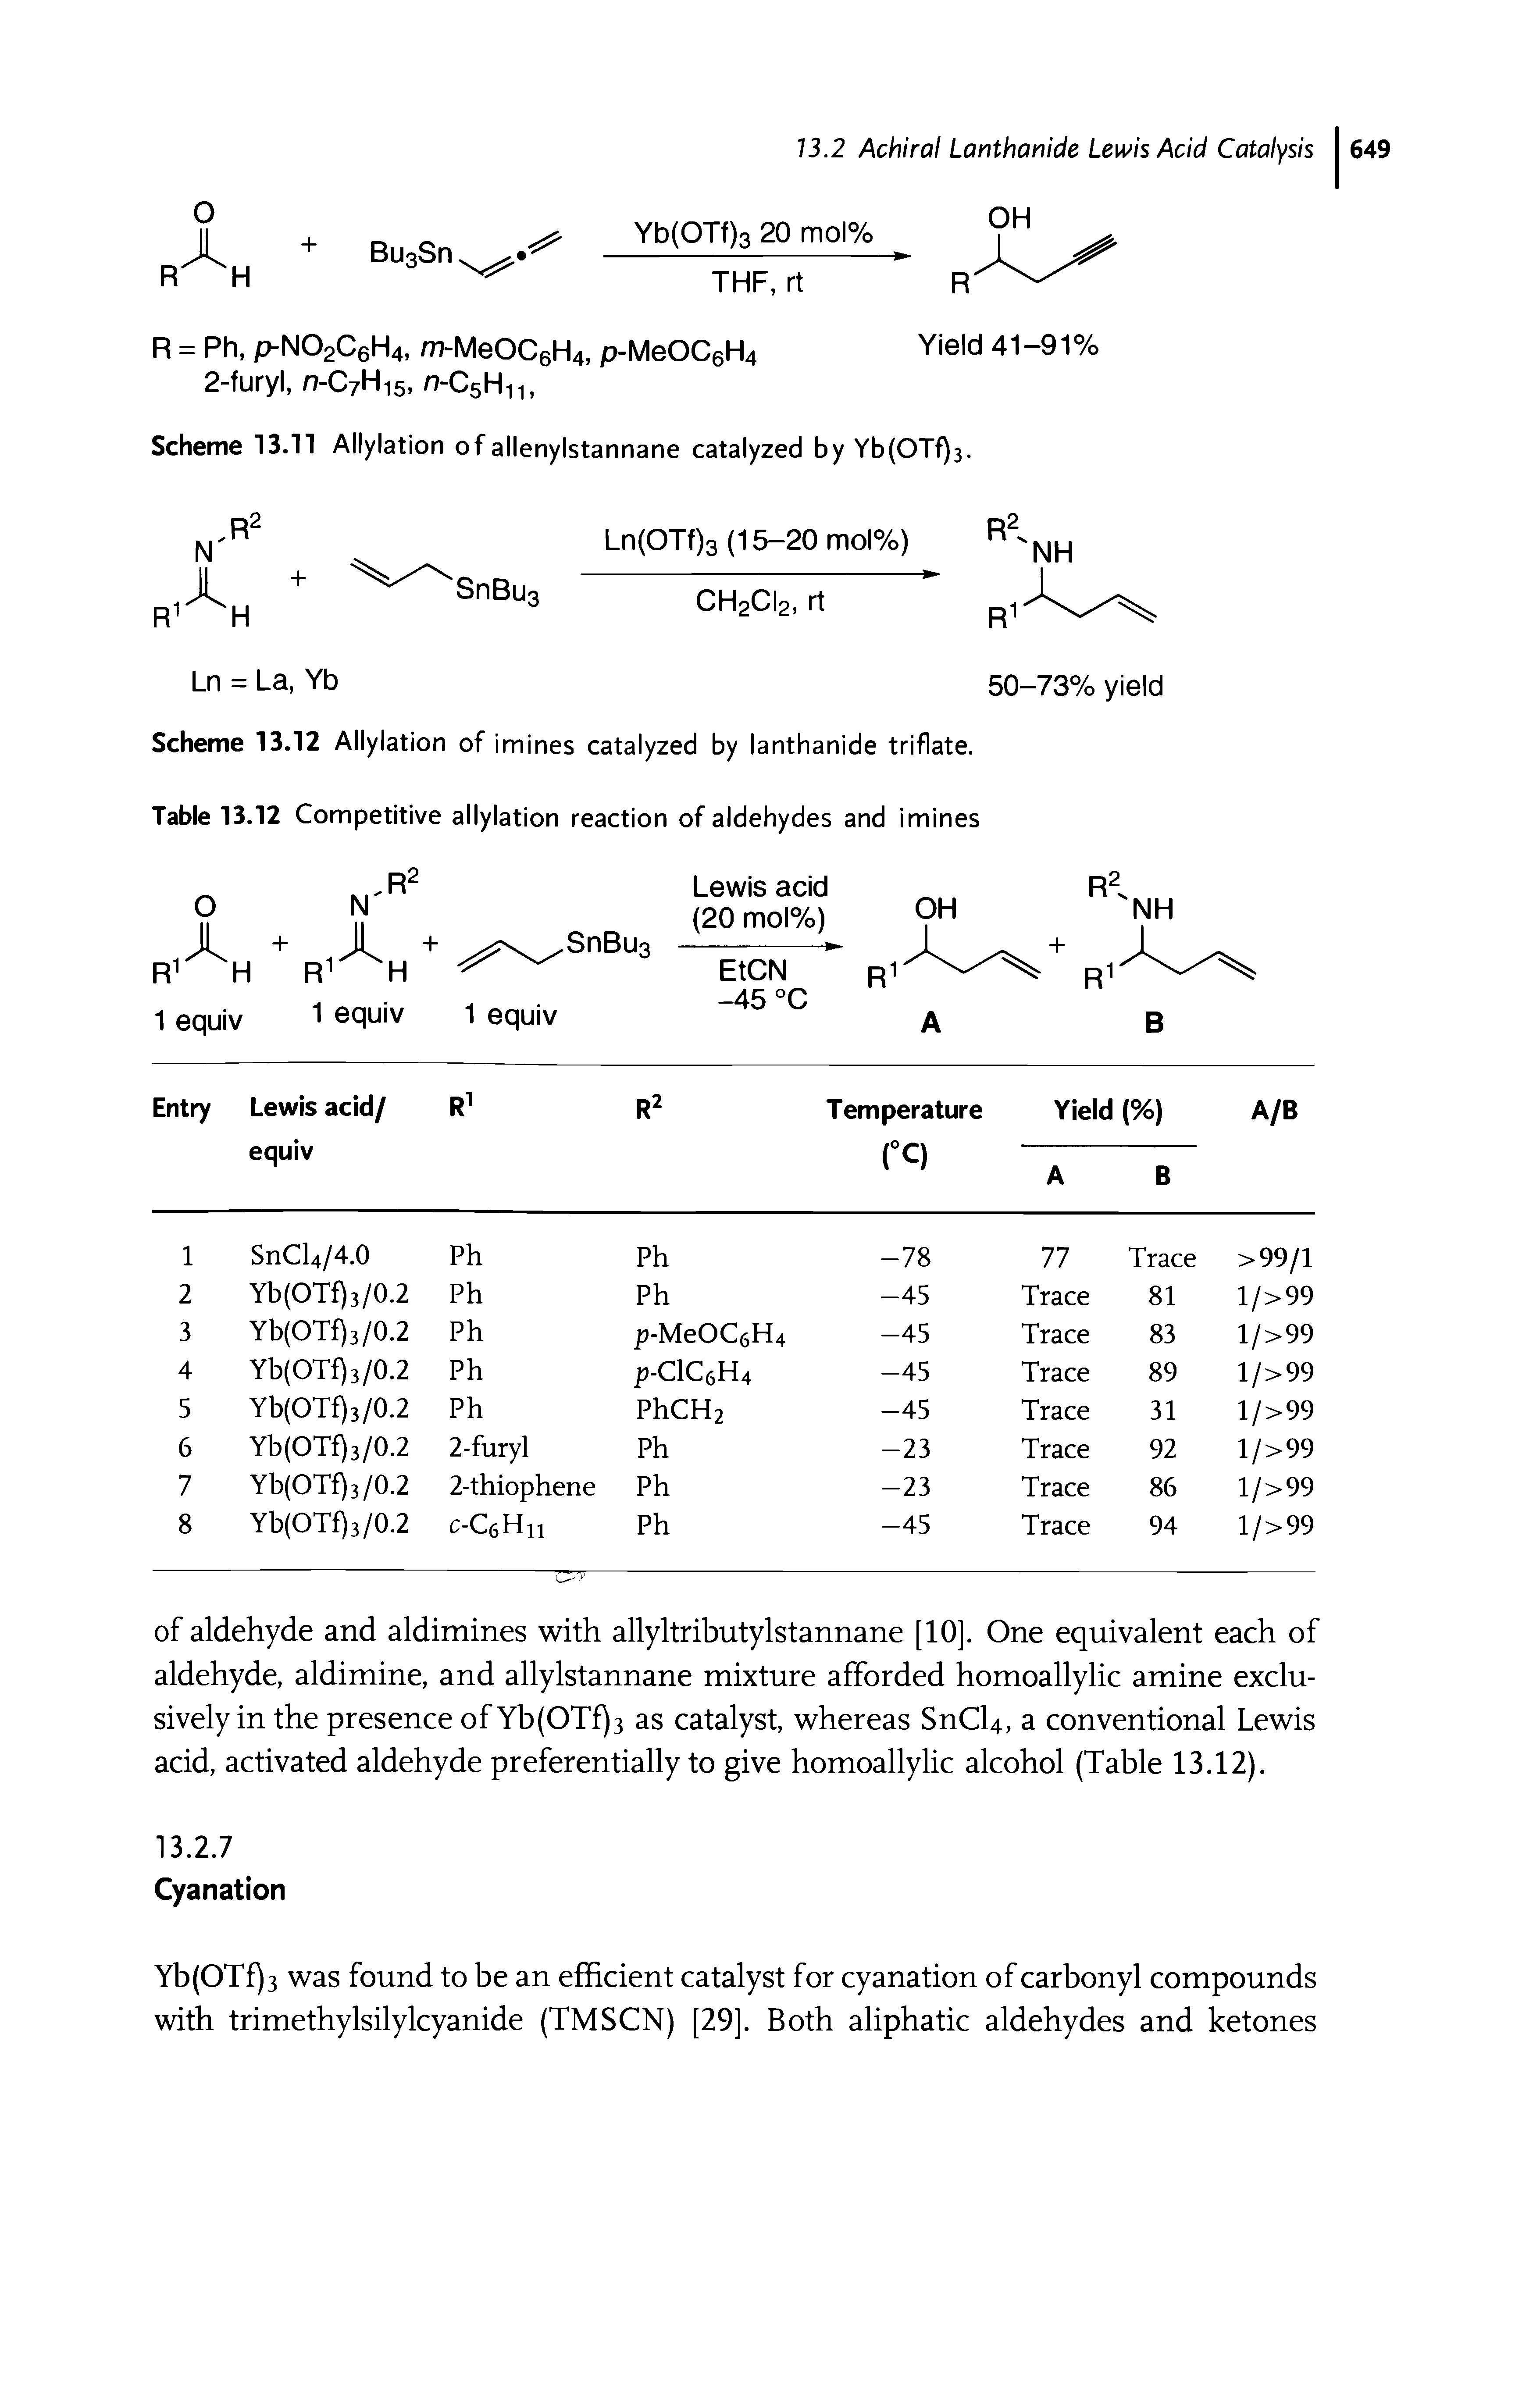 Scheme 13.12 Allylation of imines catalyzed by lanthanide triflate. Table 13.12 Competitive allylation reaction of aldehydes and imines...